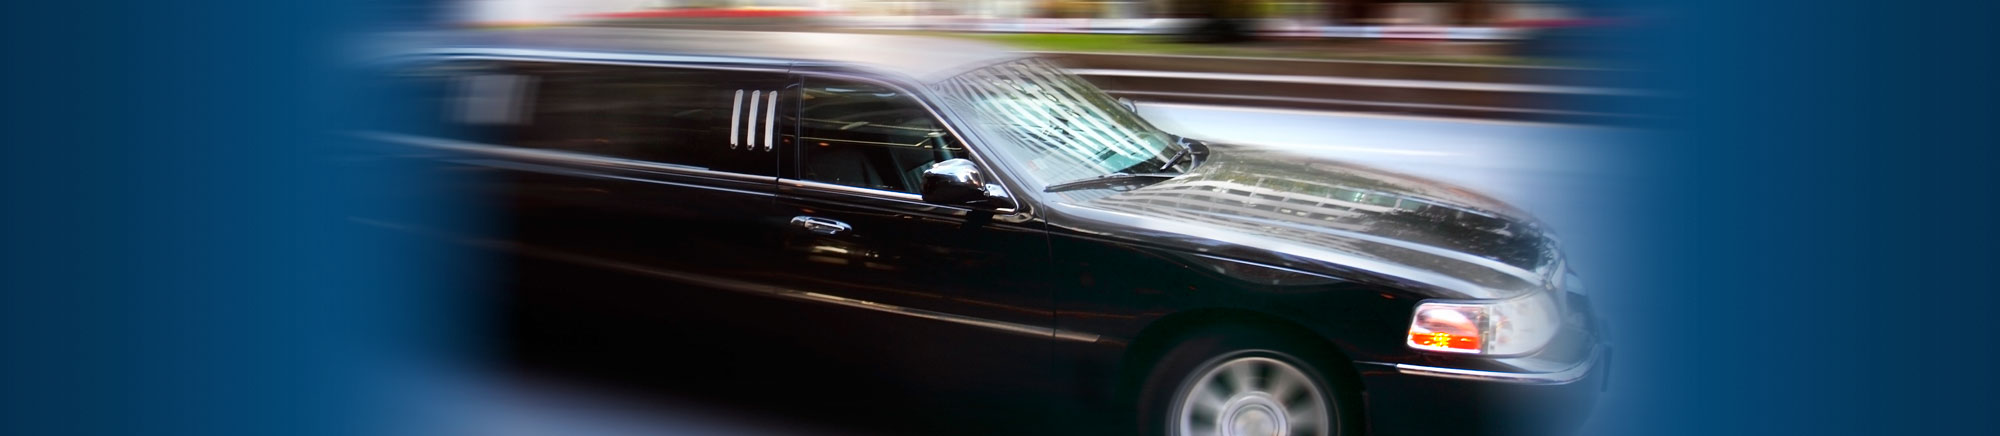 Arrive in style in your Pacific Vancouver Limousine